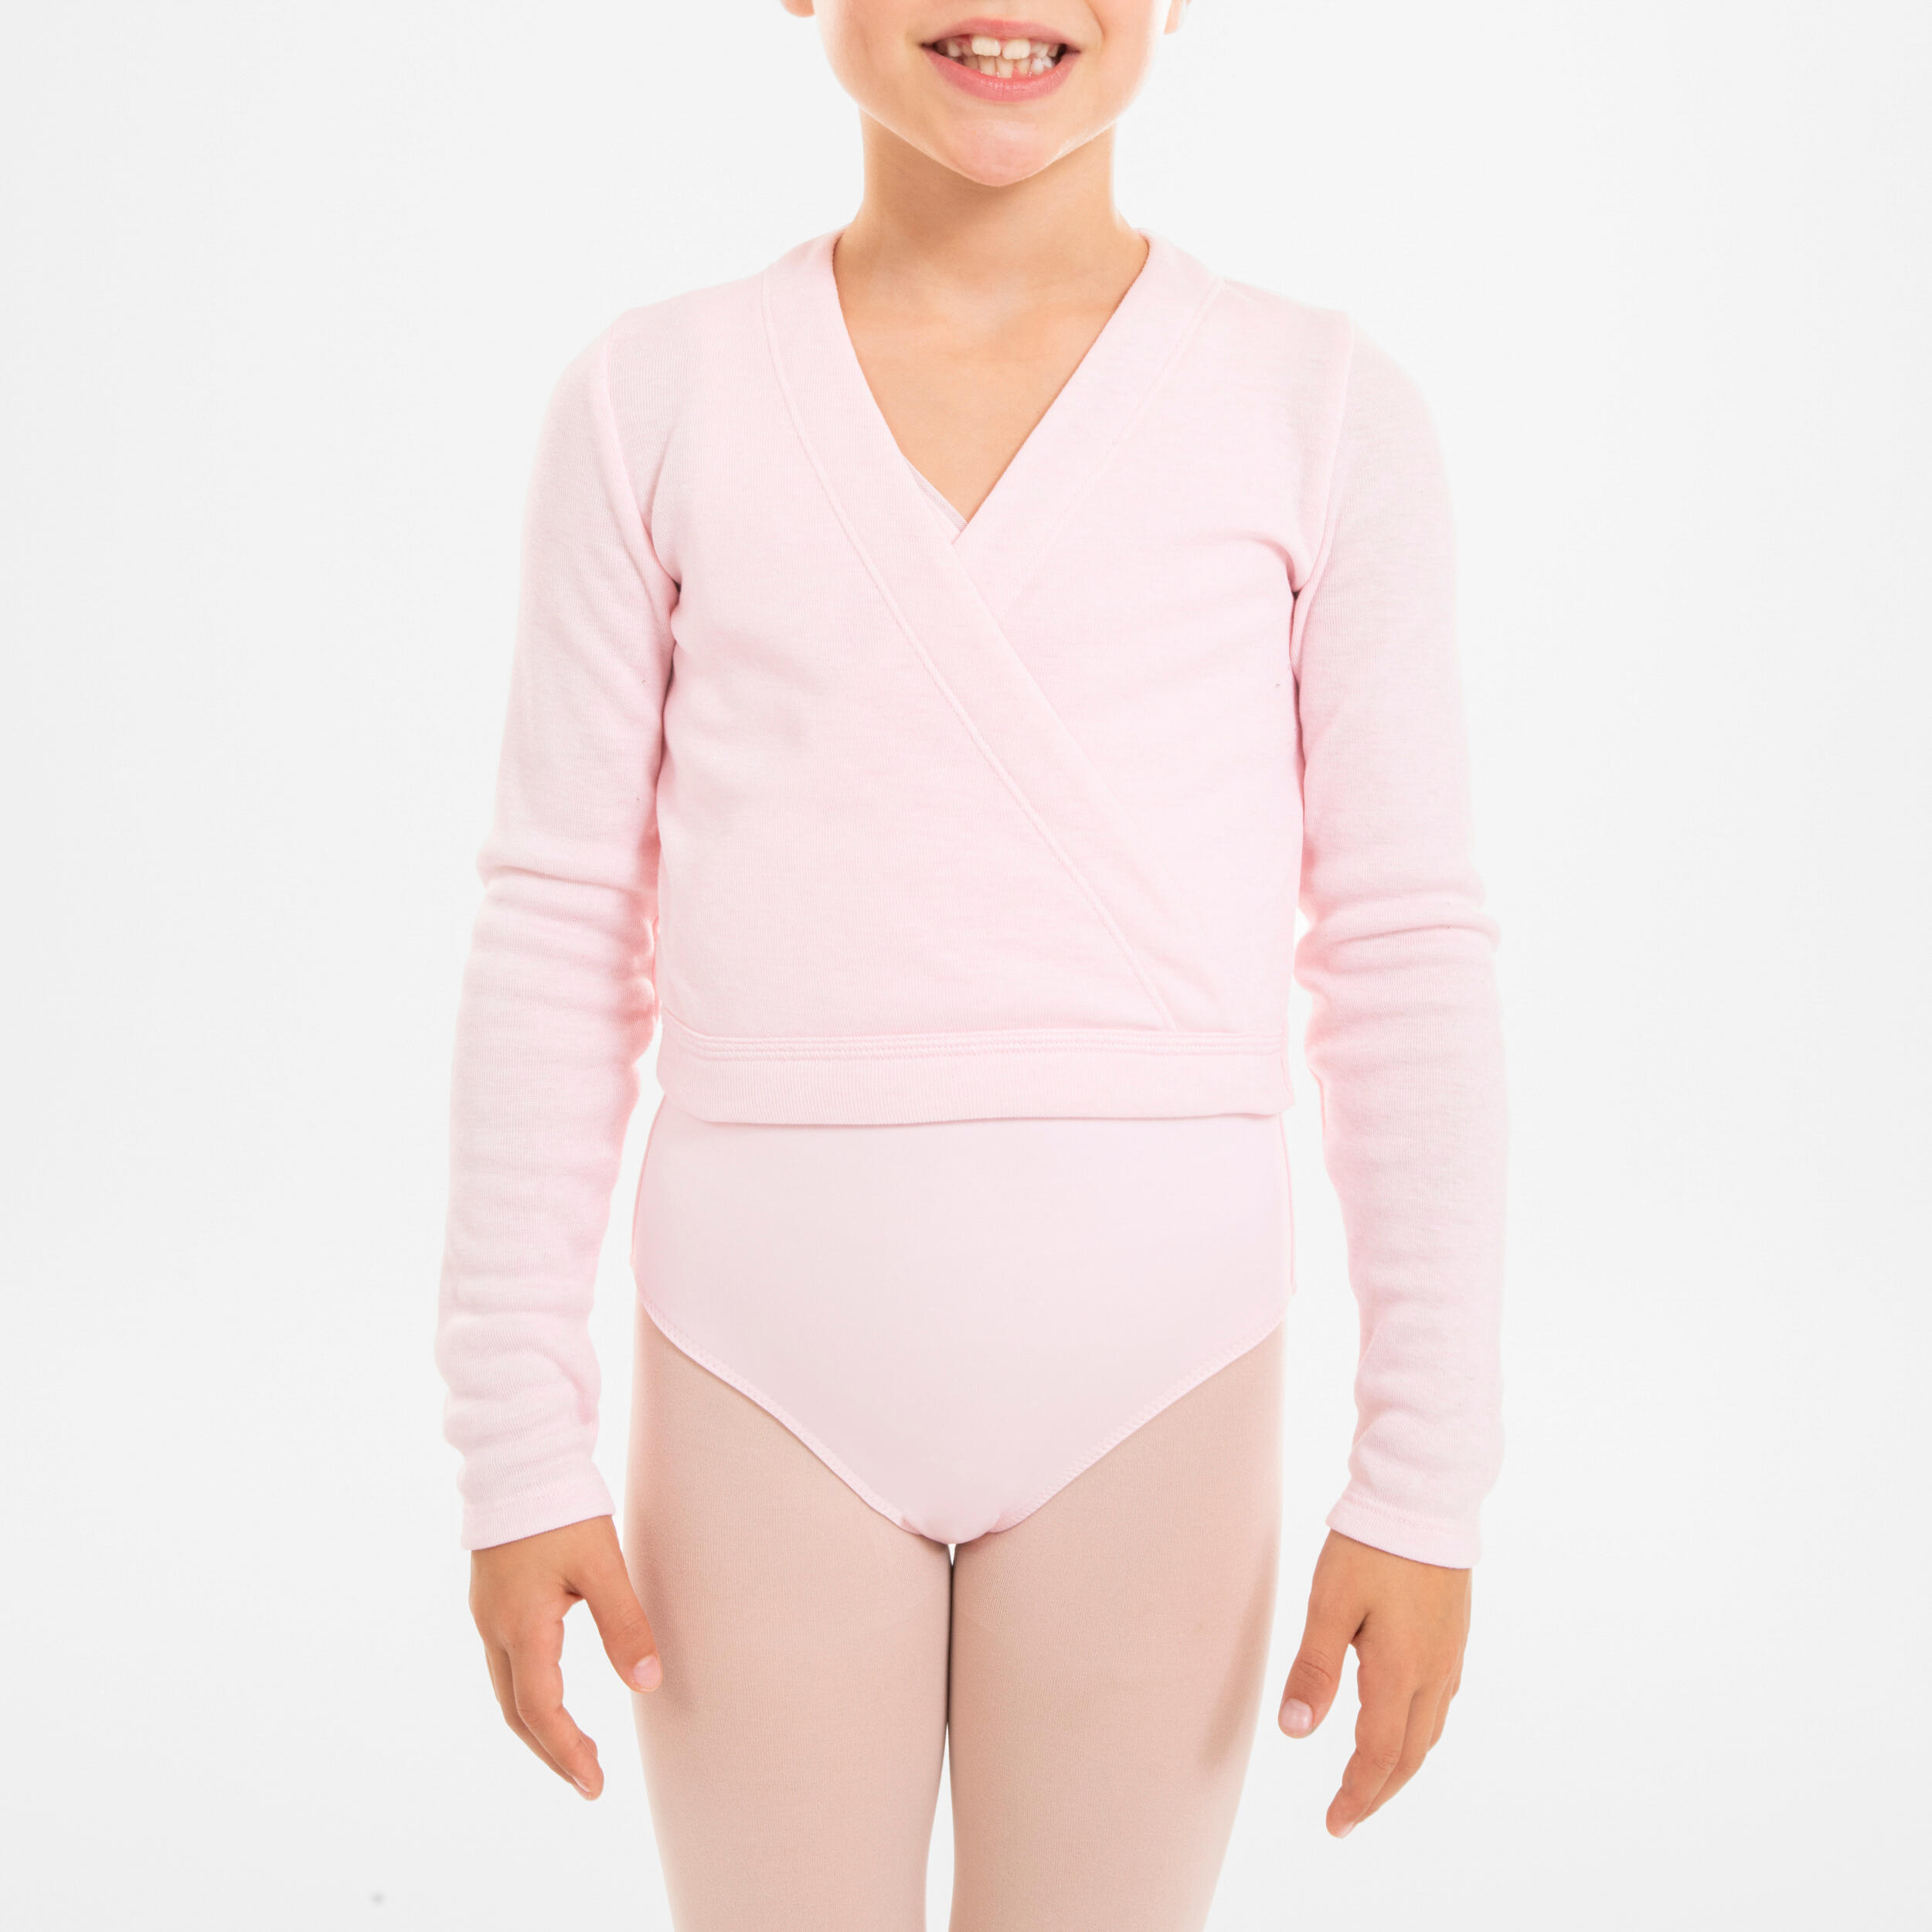 DIPUG Ballet Tights for Girls Dance Tights Toddler Pink Ballet Tights Girls  Thick Soft Footed Kids Ballet Tights, Ballet Pink Size 5-8 Years, 2 Pack :  Buy Online at Best Price in